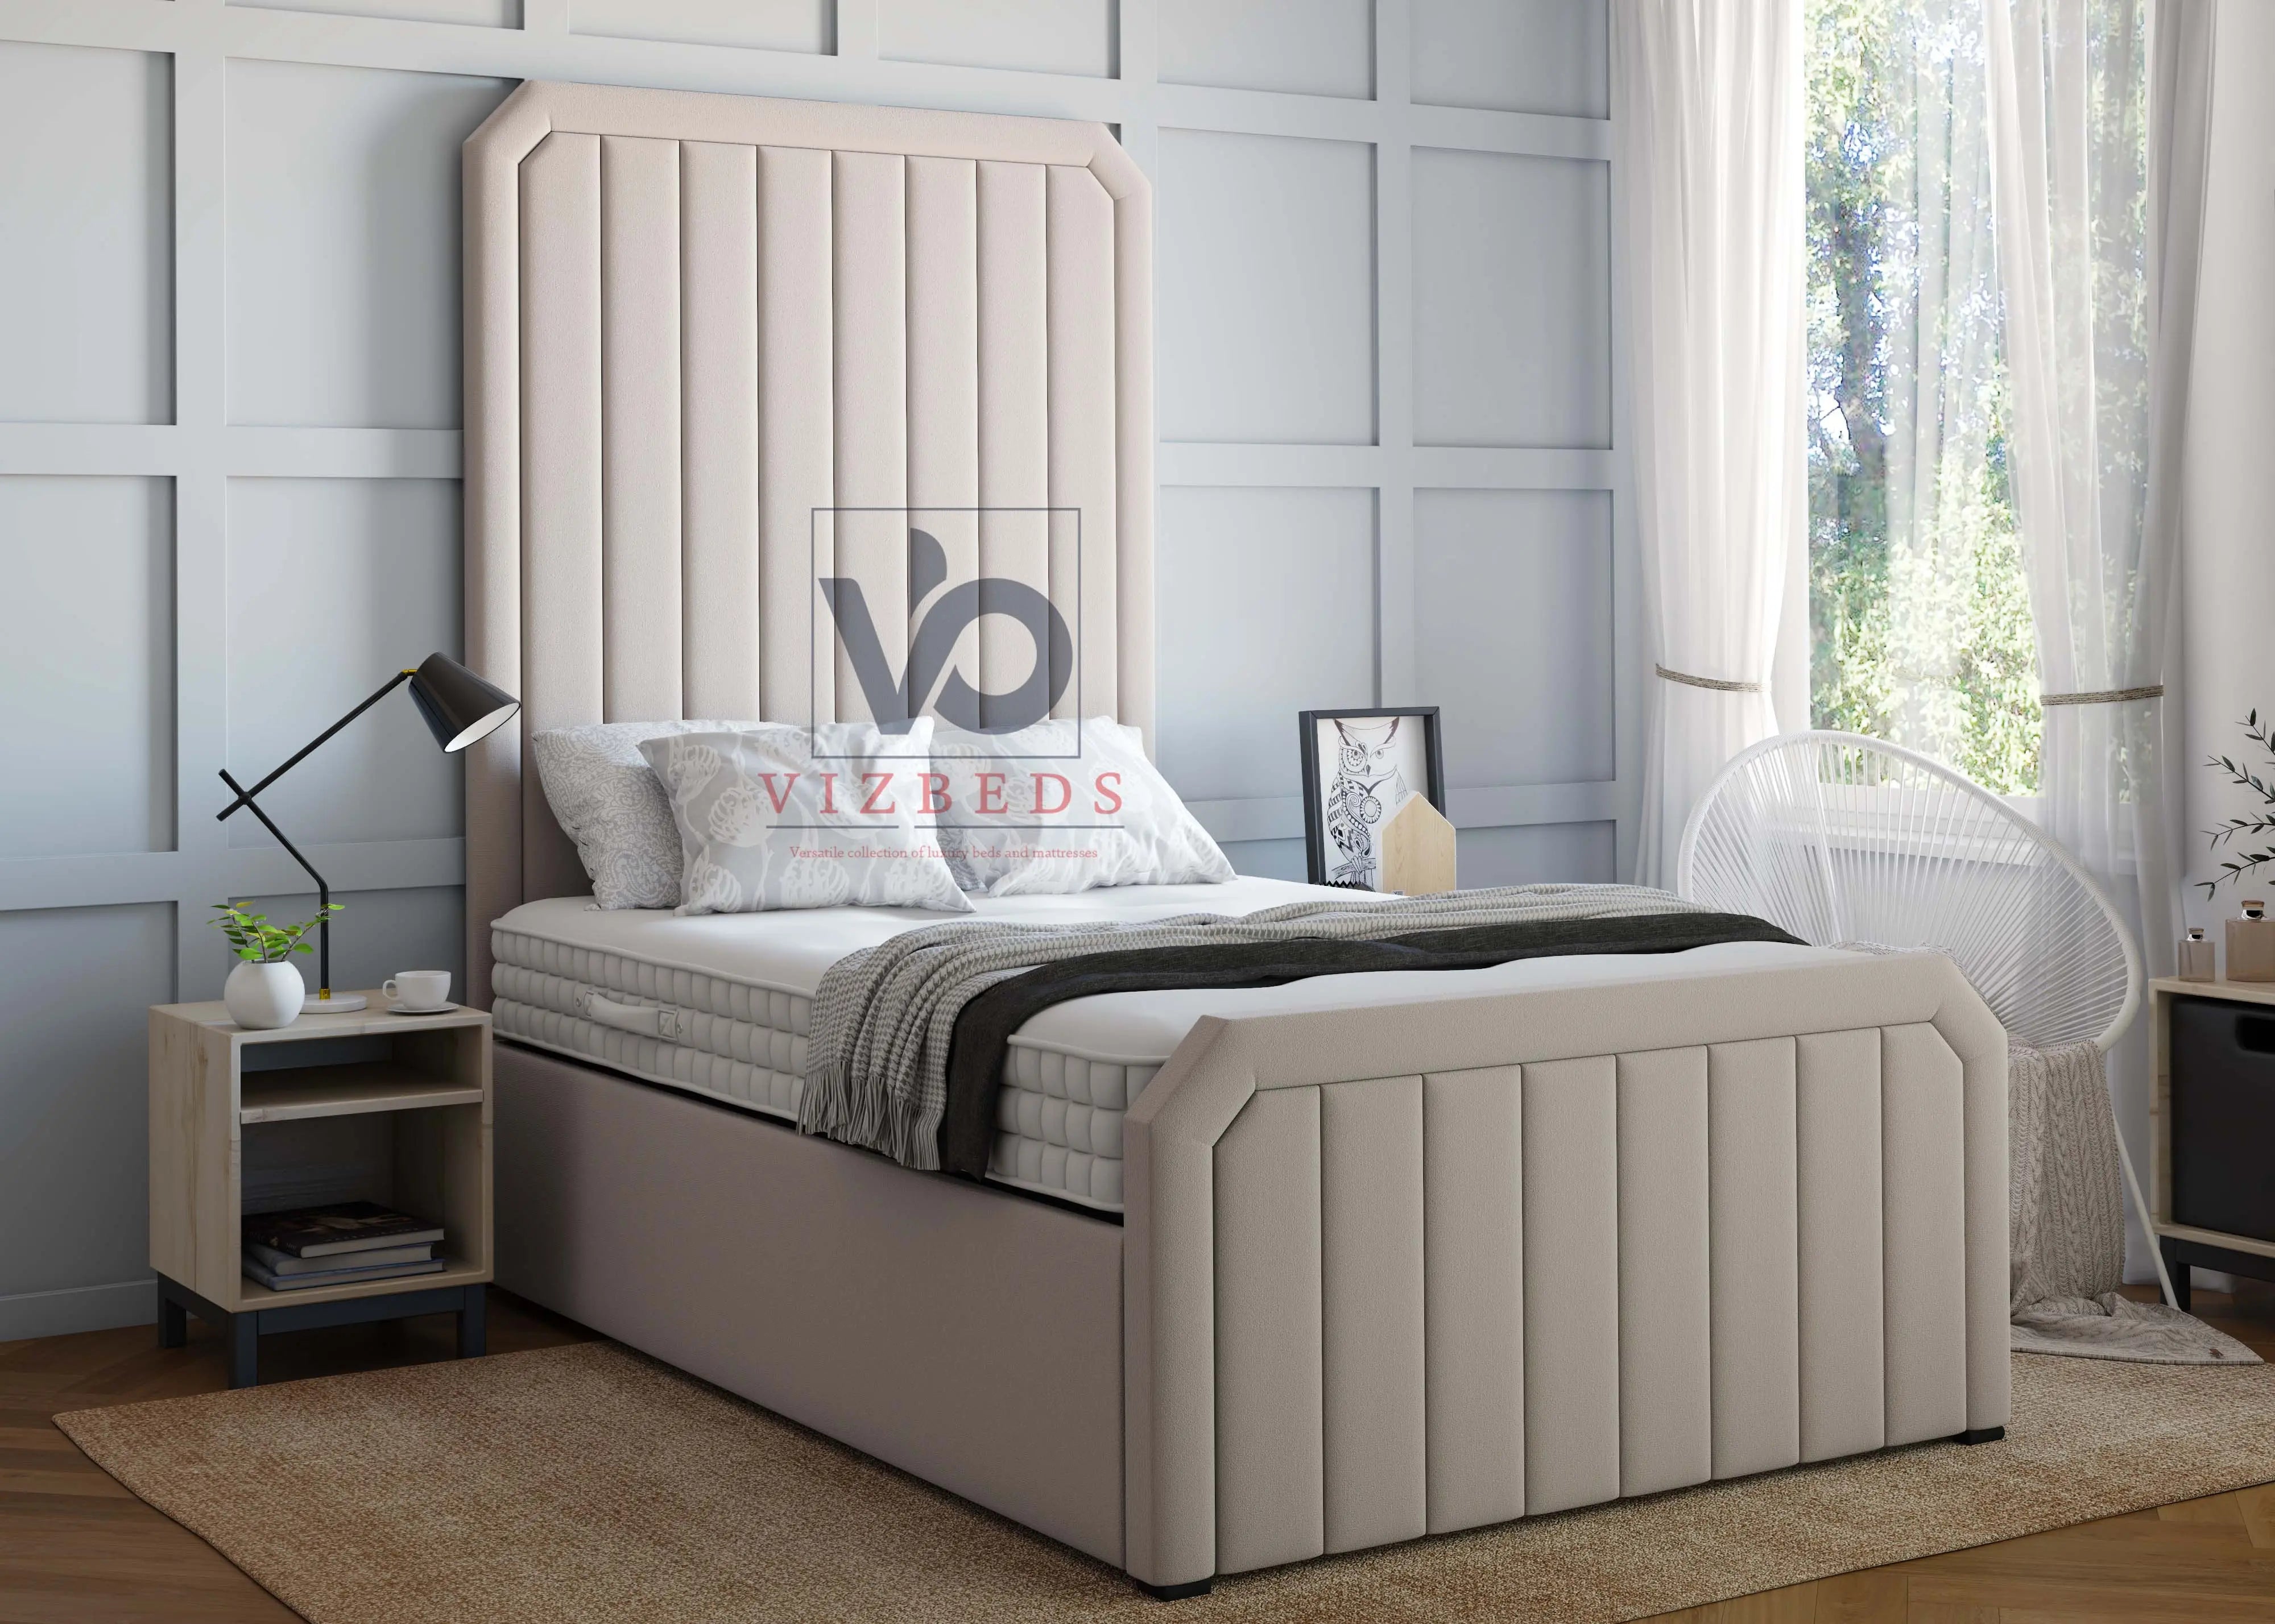 Hyponos Luxury Bed With Extended Headboard